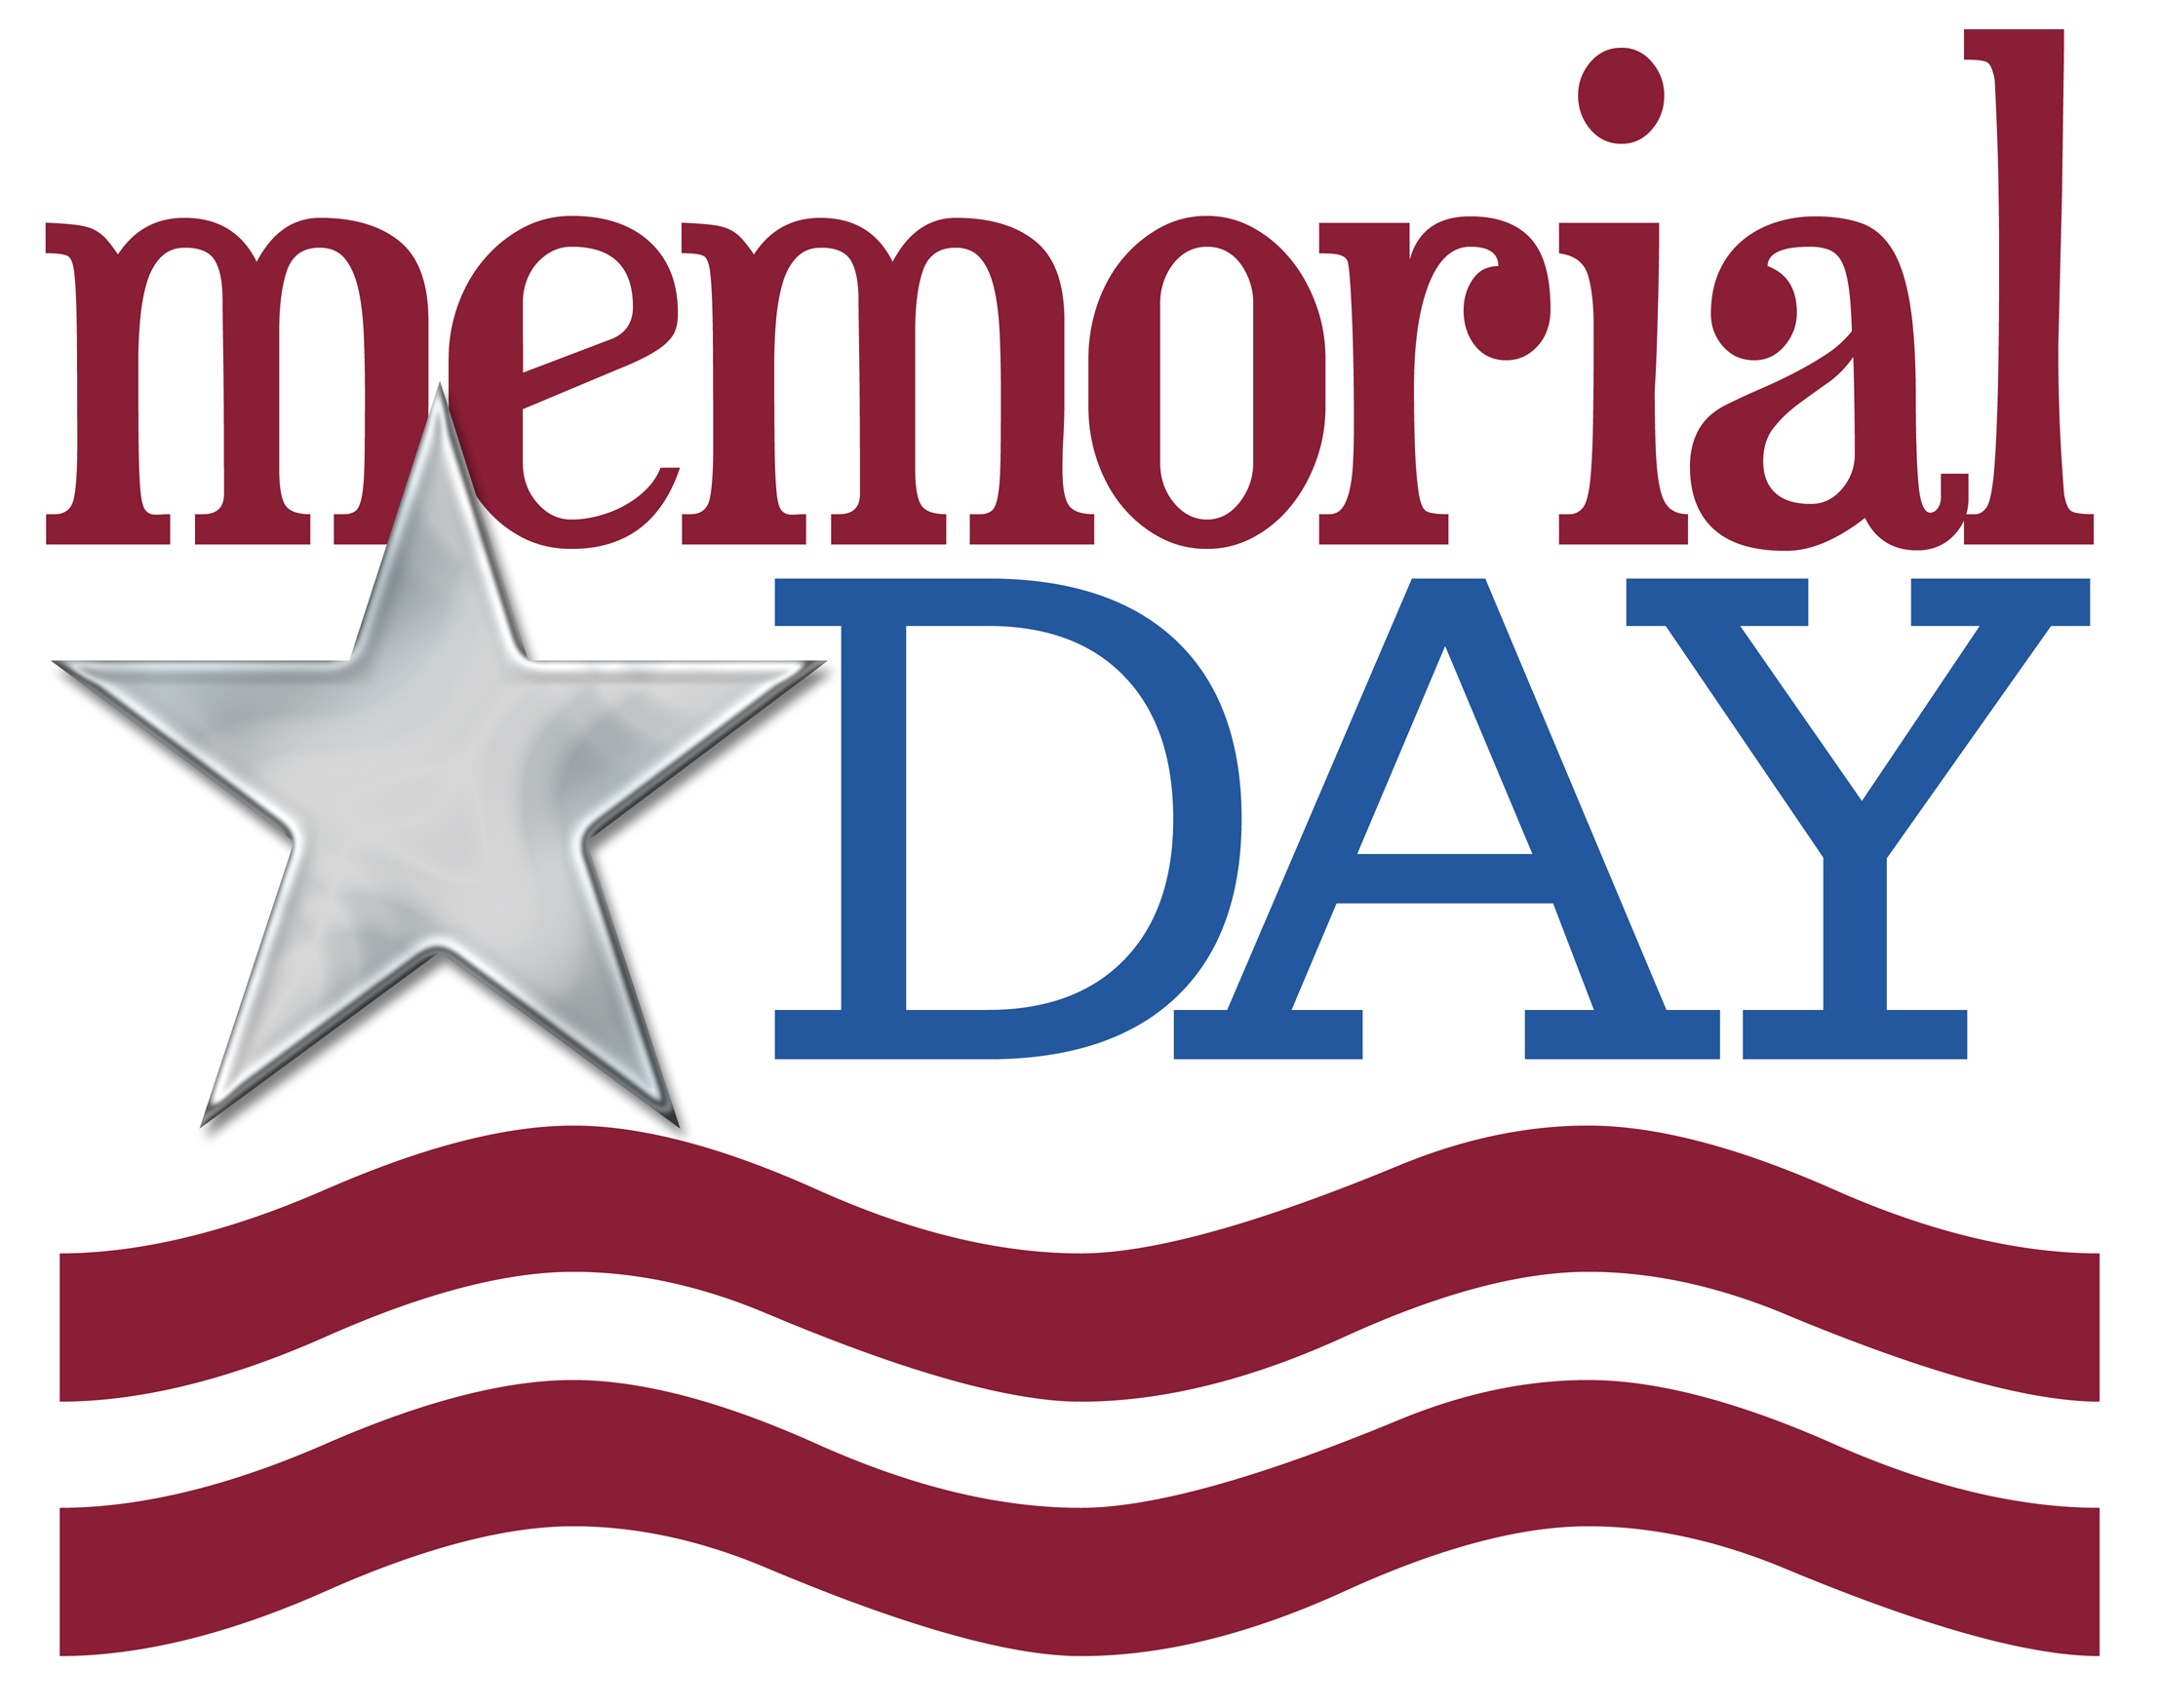 Memorial Day Image Backgrounds - Memorial Day Clipart - HD Wallpaper 